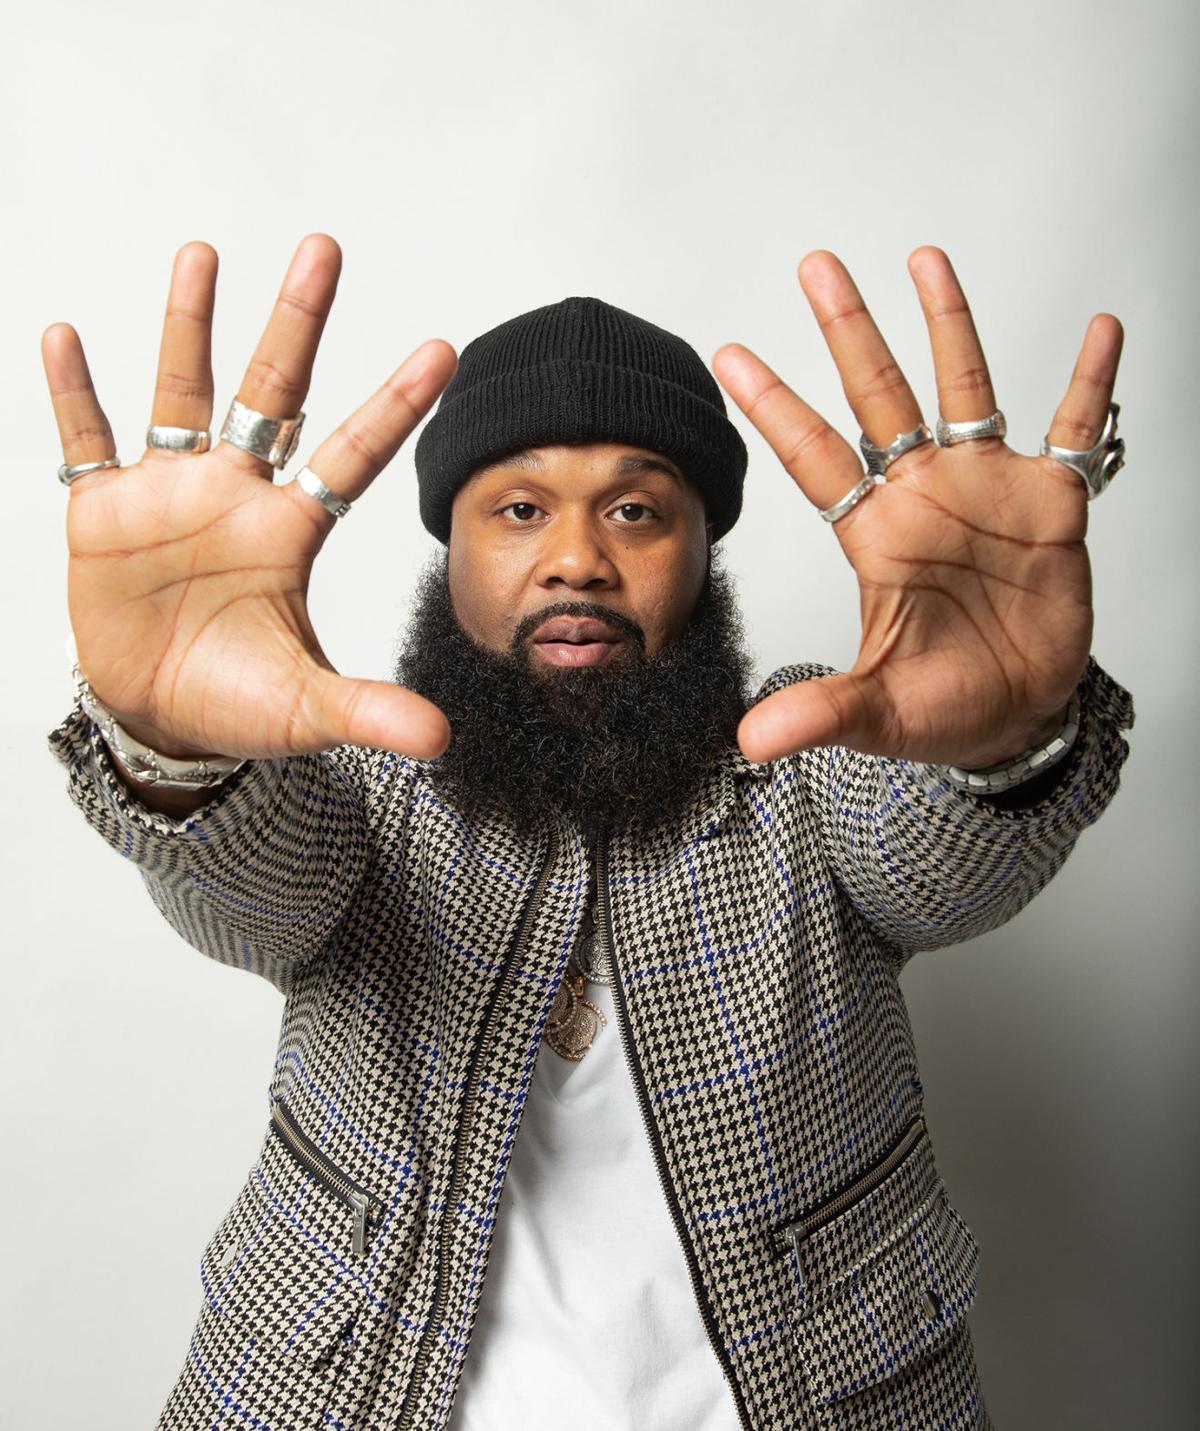 Country rap, hip-hop artist Brown headlining Friday After 5 | Features ...